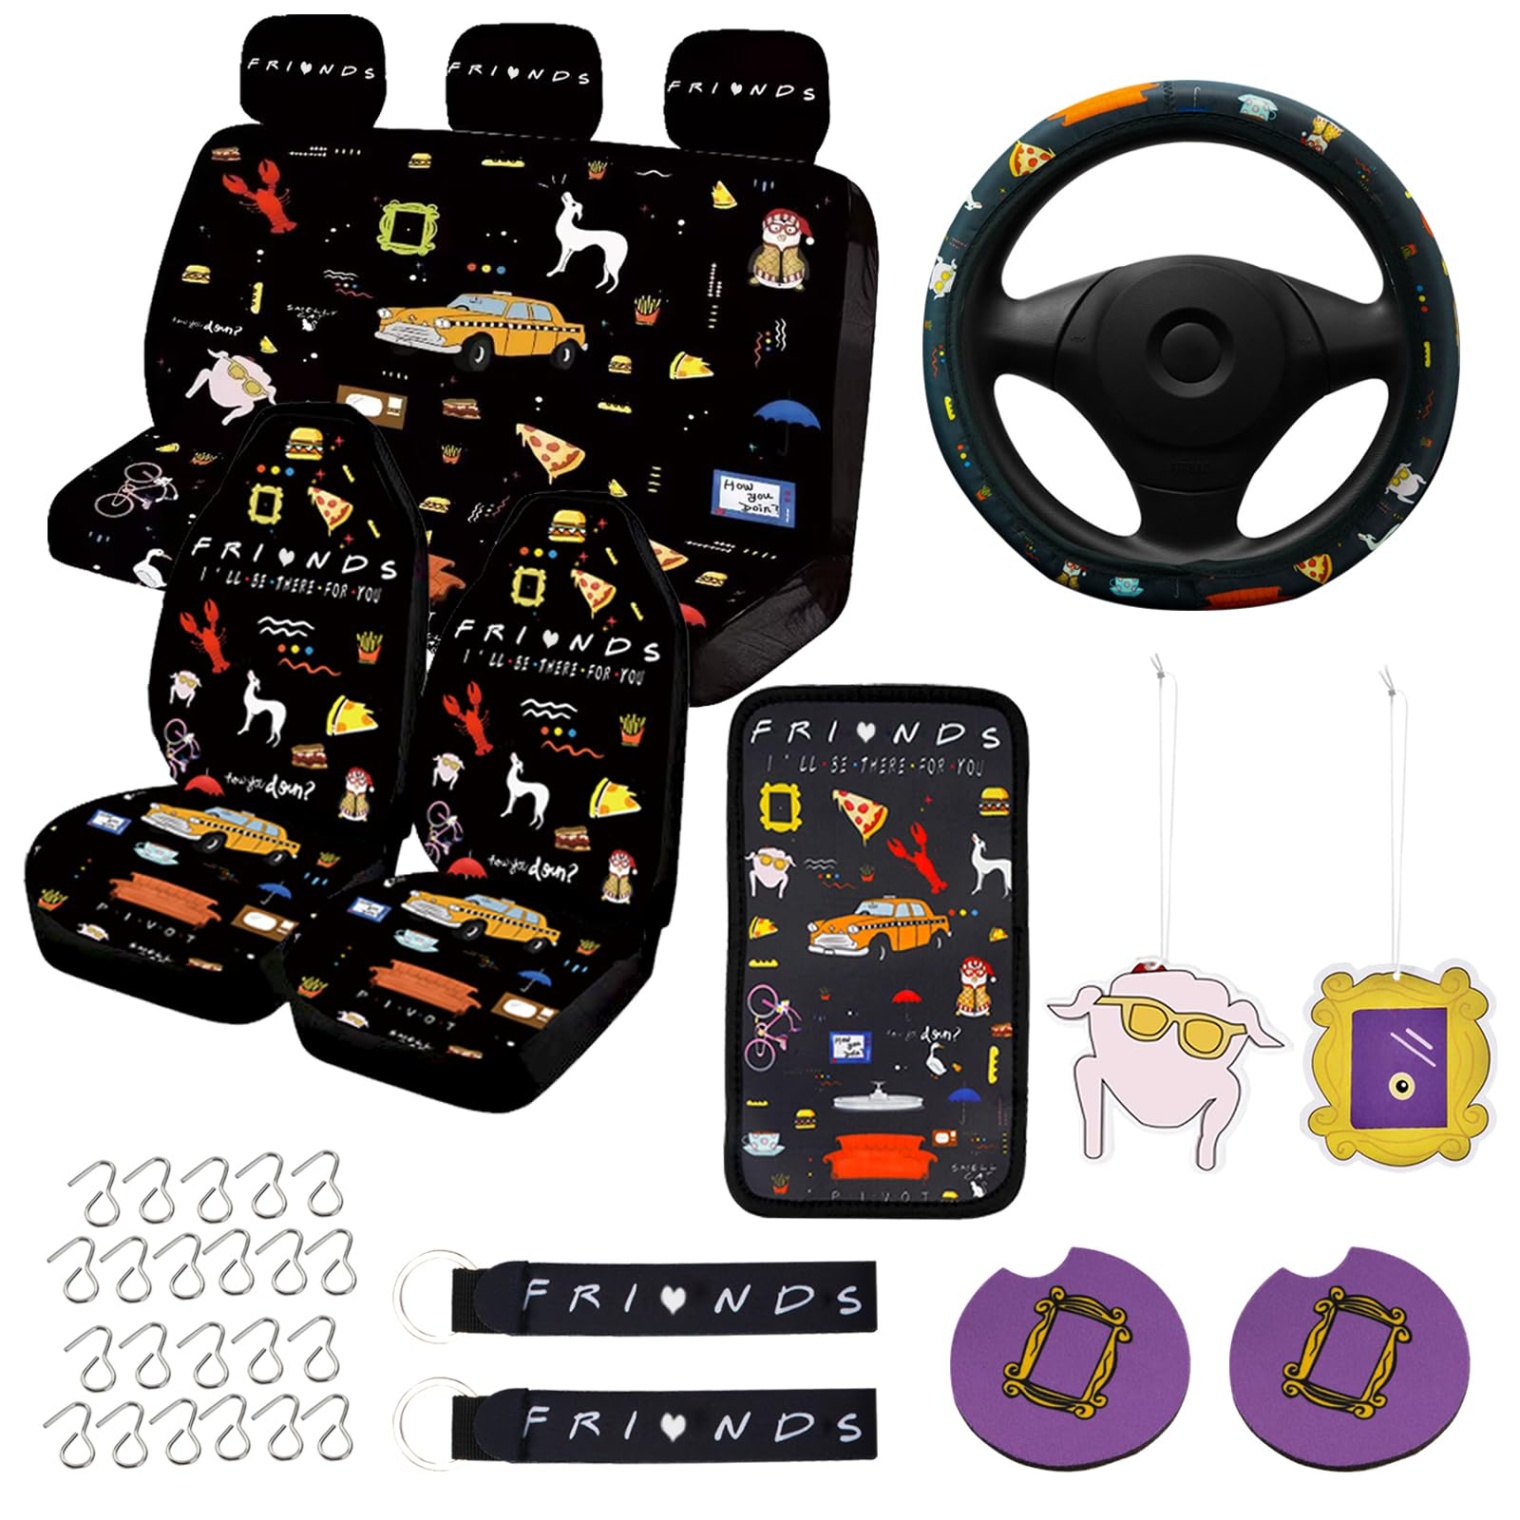 fun car accessories Niche Utama Home PCS Car Accessories Set,Funny TV Show Merchandise,TV Show Gifts,Steering  Wheel Cover,Universal for Auto Truck Van SUV